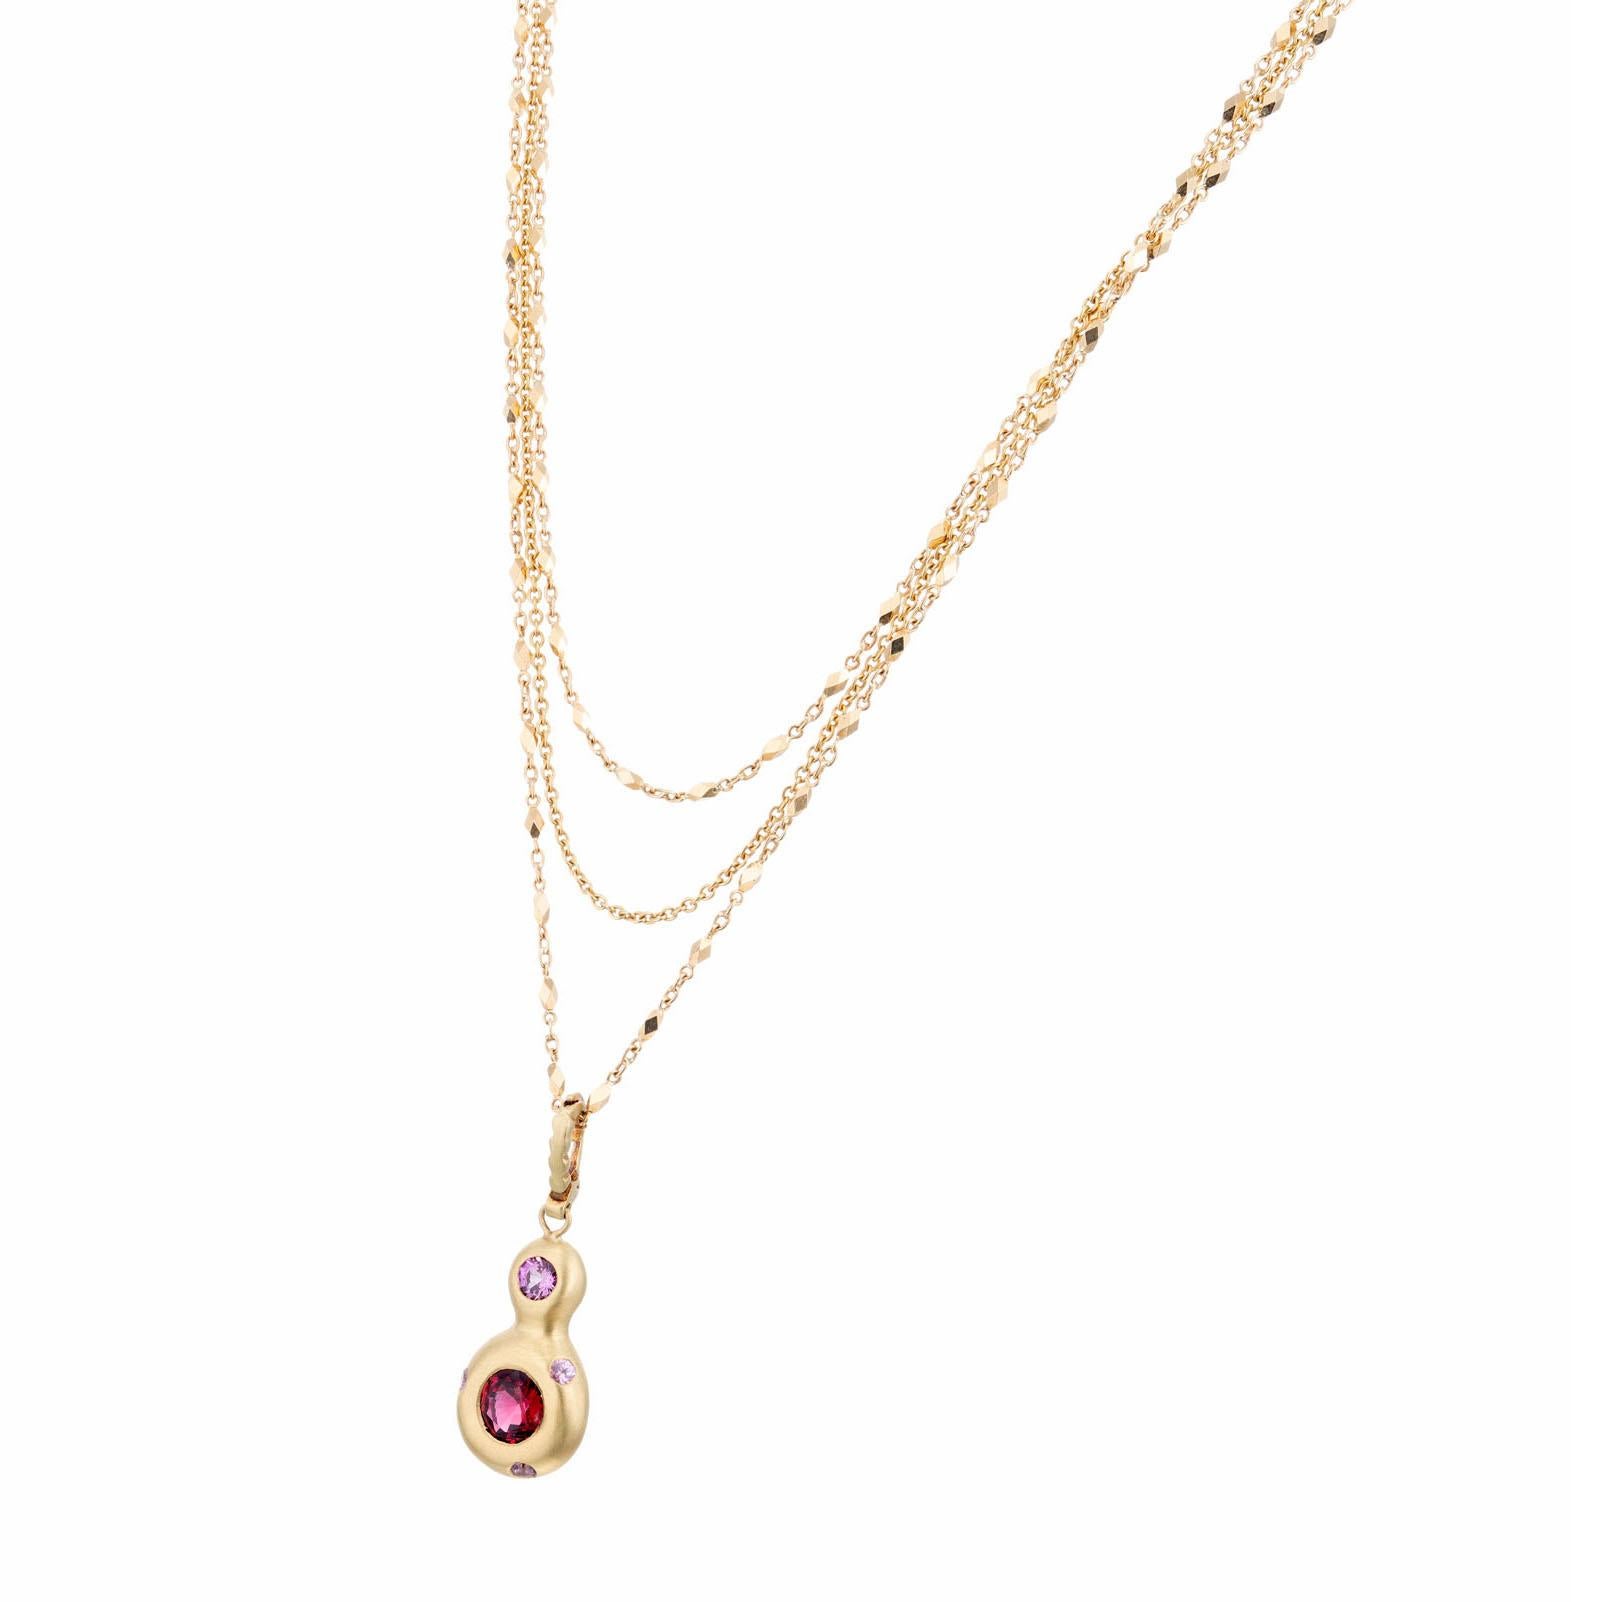 GIA Certified natural red Burma spinel 18k yellow gold Robin Rotenier pendant necklace. Red spinel with a purple accent sapphires. Pendant stamped RR.

1 round red spinel VS, approx. 1.32cts GIA Certificate # 2205737452
1 round deep pink sapphire,